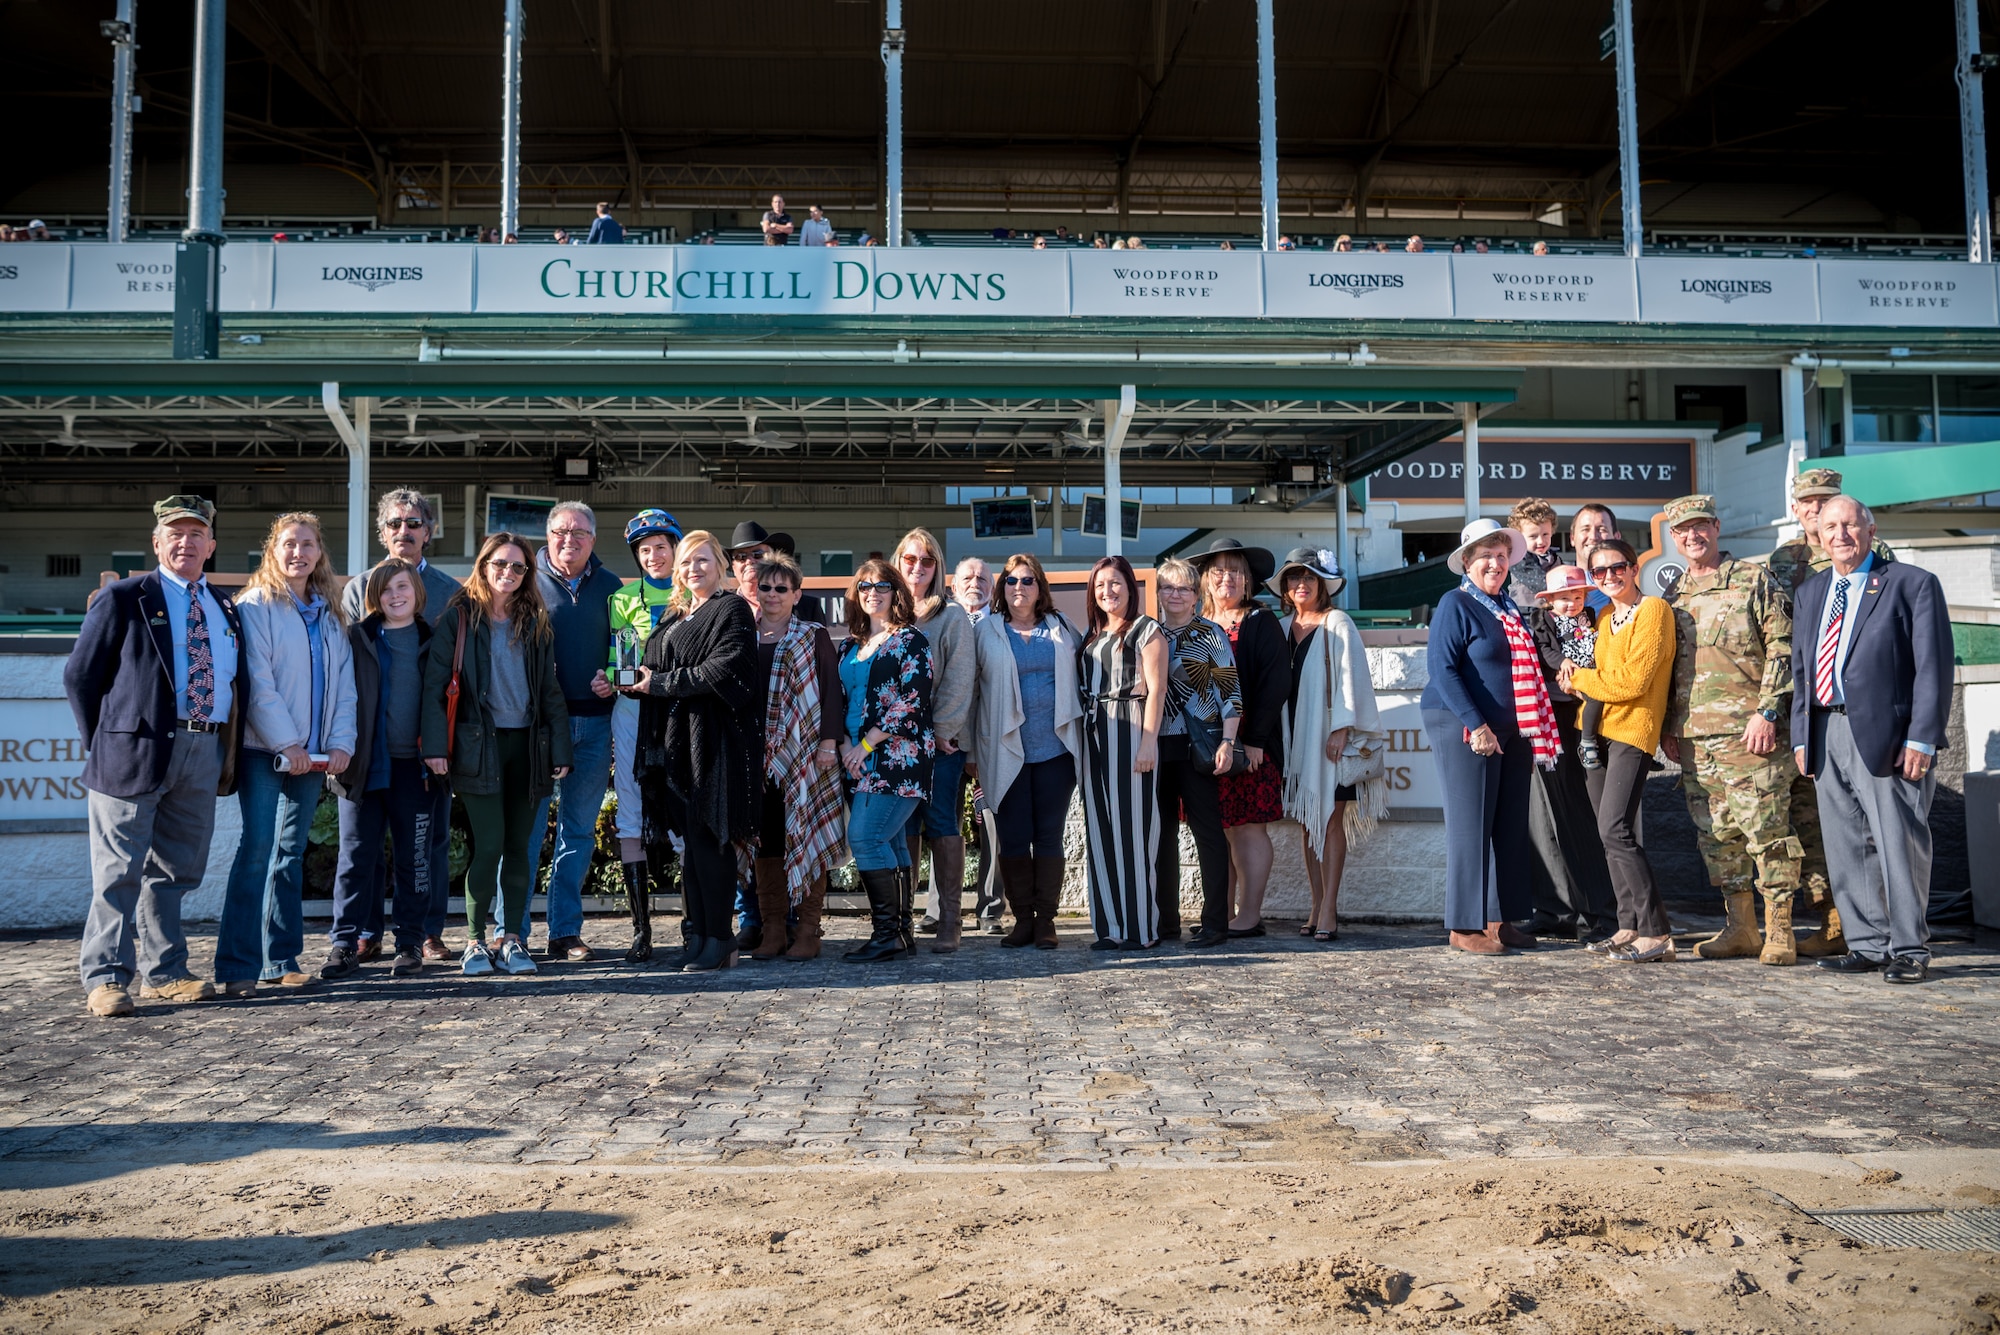 Gold Star family members are joined by Air Force Gen. Joseph Lengyel, chief of the National Guard Bureau, in the winner's circle to present the trophy for a race named in honor of Gold Star Families at the tenth annual Survivors Day at the Races at Churchill Downs in Louisville, Ky., Nov. 3, 2019. The event welcomed nearly 1,000 family members of fallen service members for a day of fellowship and healing. (U.S. Air National Guard photo by Staff Sgt. Joshua Horton)